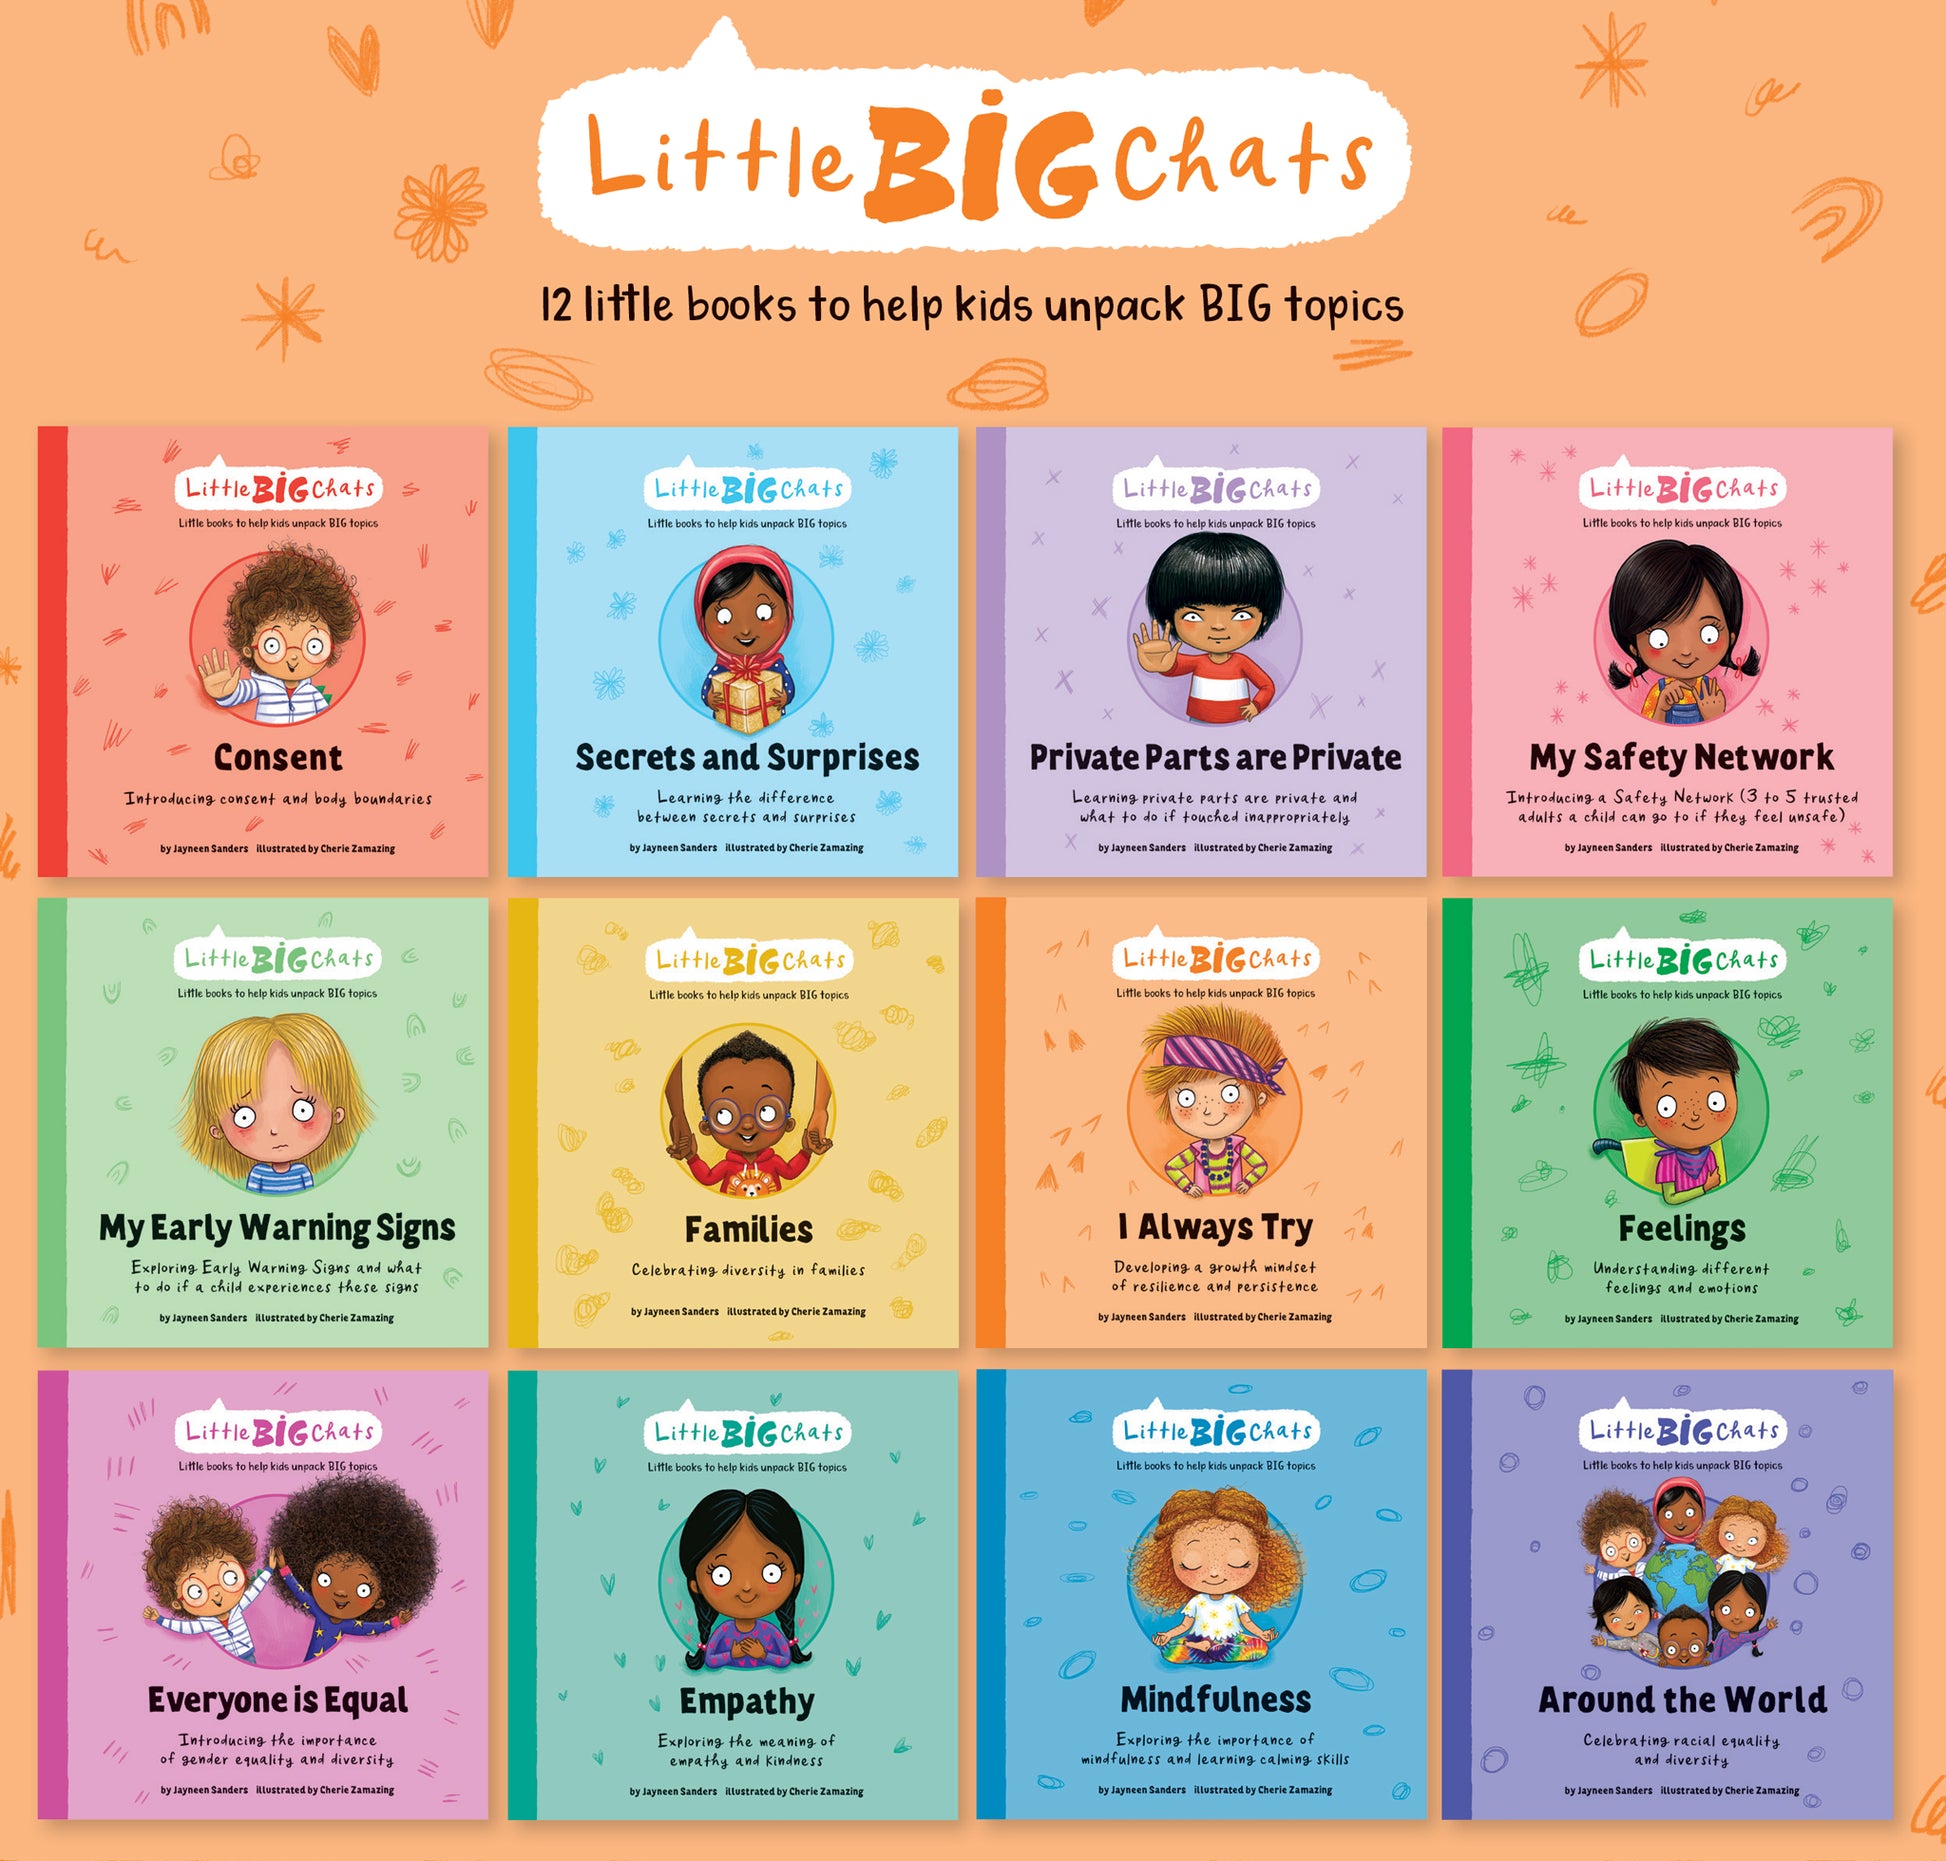 A promotional image for the Little BIG Chats book series containing a collage of the 12 books making up the series. Little BIG Chats: 12 Little books to help kids unpack BIG topics 